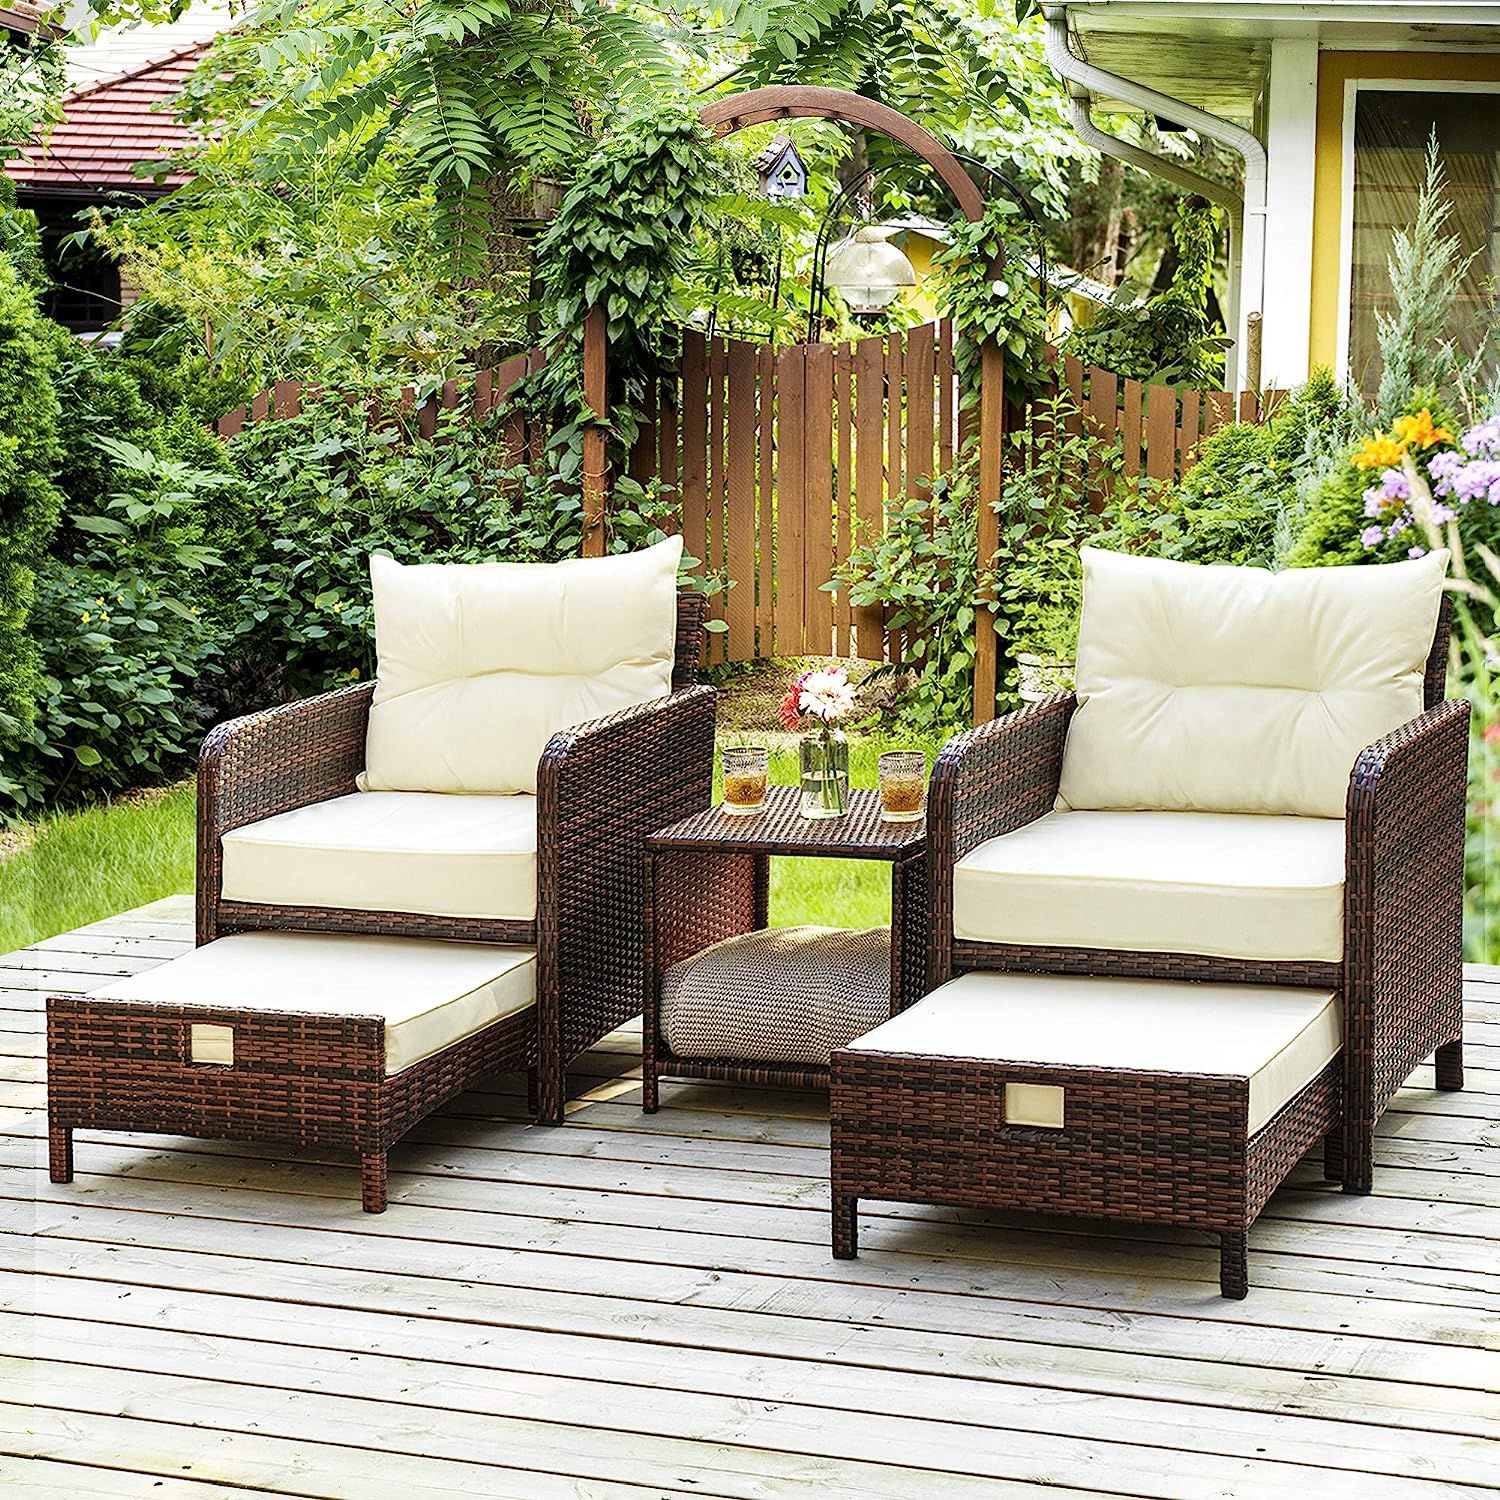 Pamapic 5 Pieces Wicker Patio Furniture Set Outdoor | Ubuy Italy For Ottomans Patio Furniture Set (View 2 of 15)